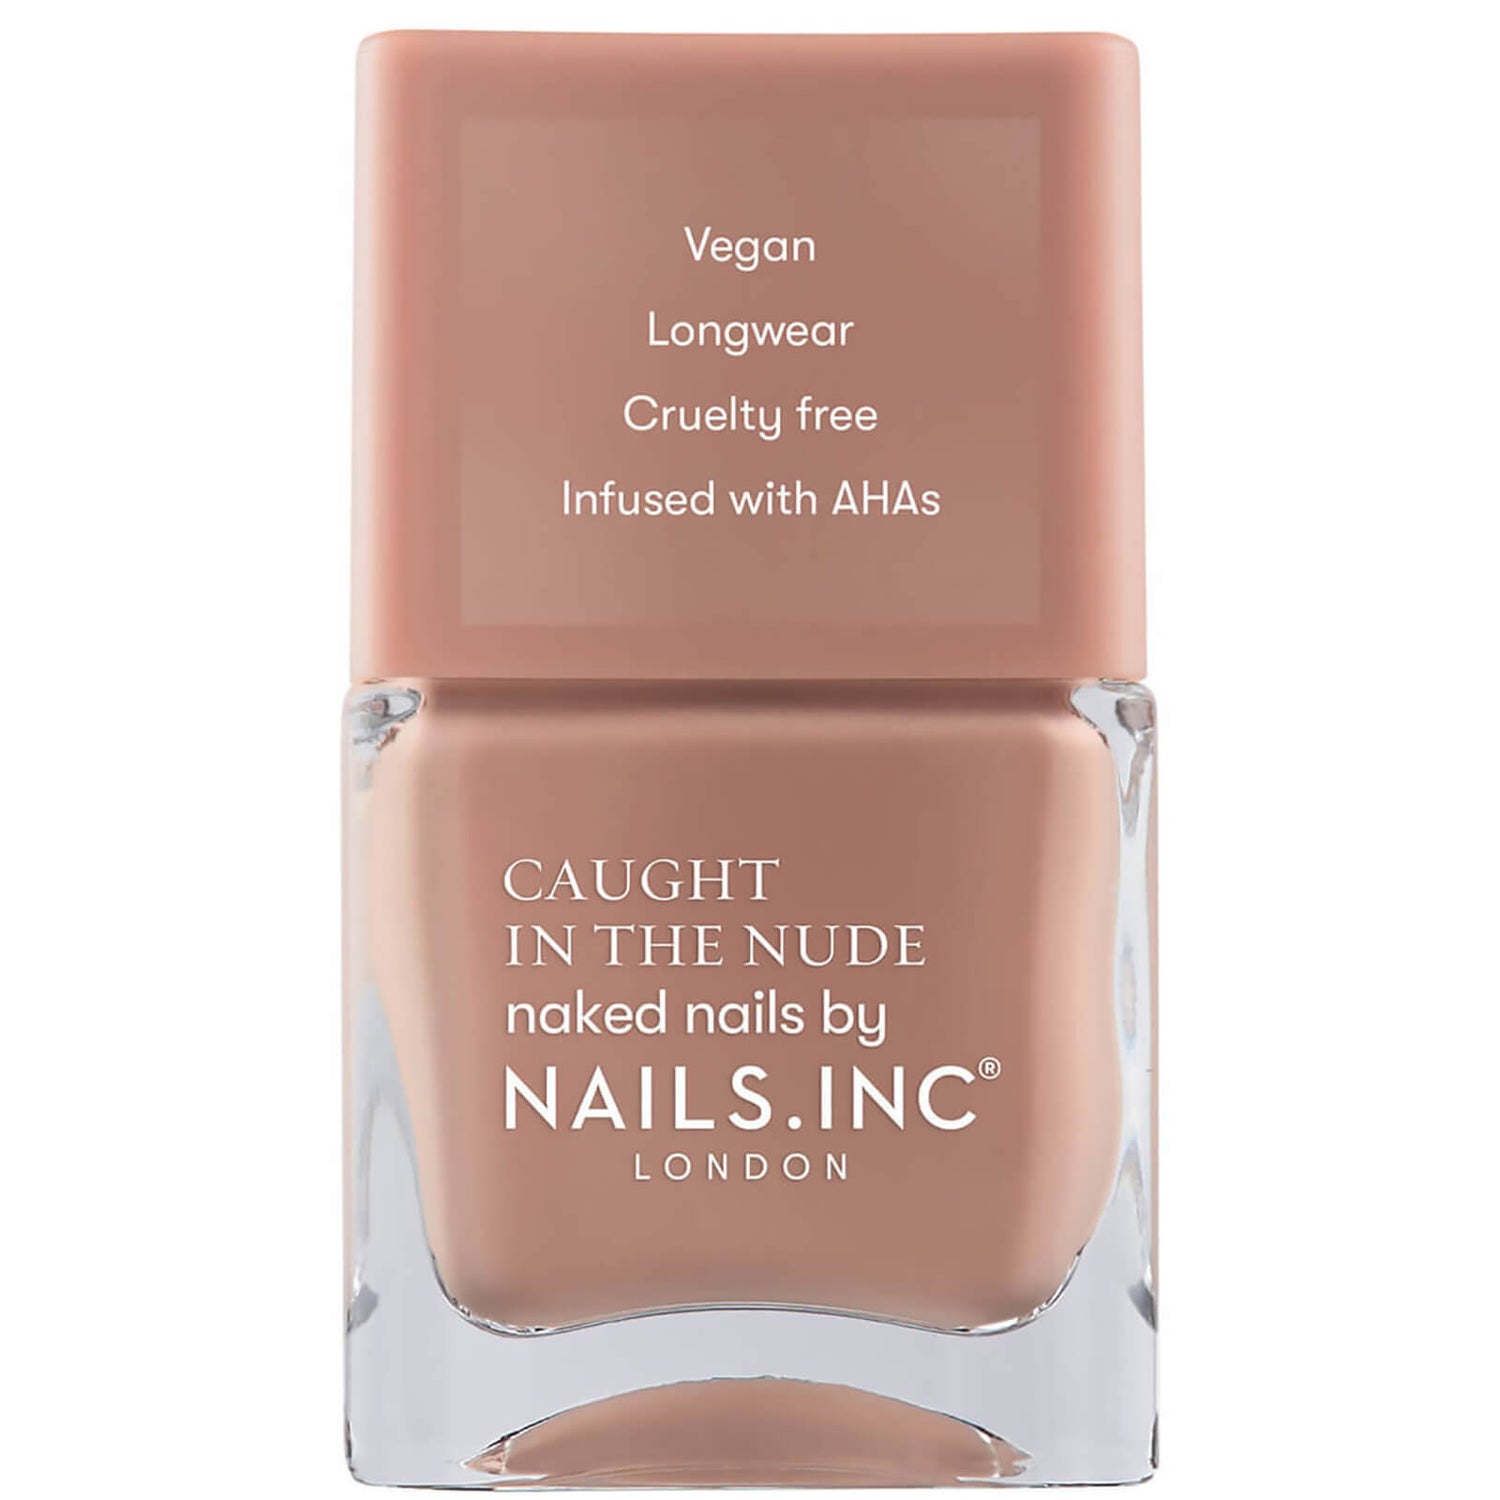 clous inc. Caught in The Nude Vernis à ongles 15ml (Diverses teintes)